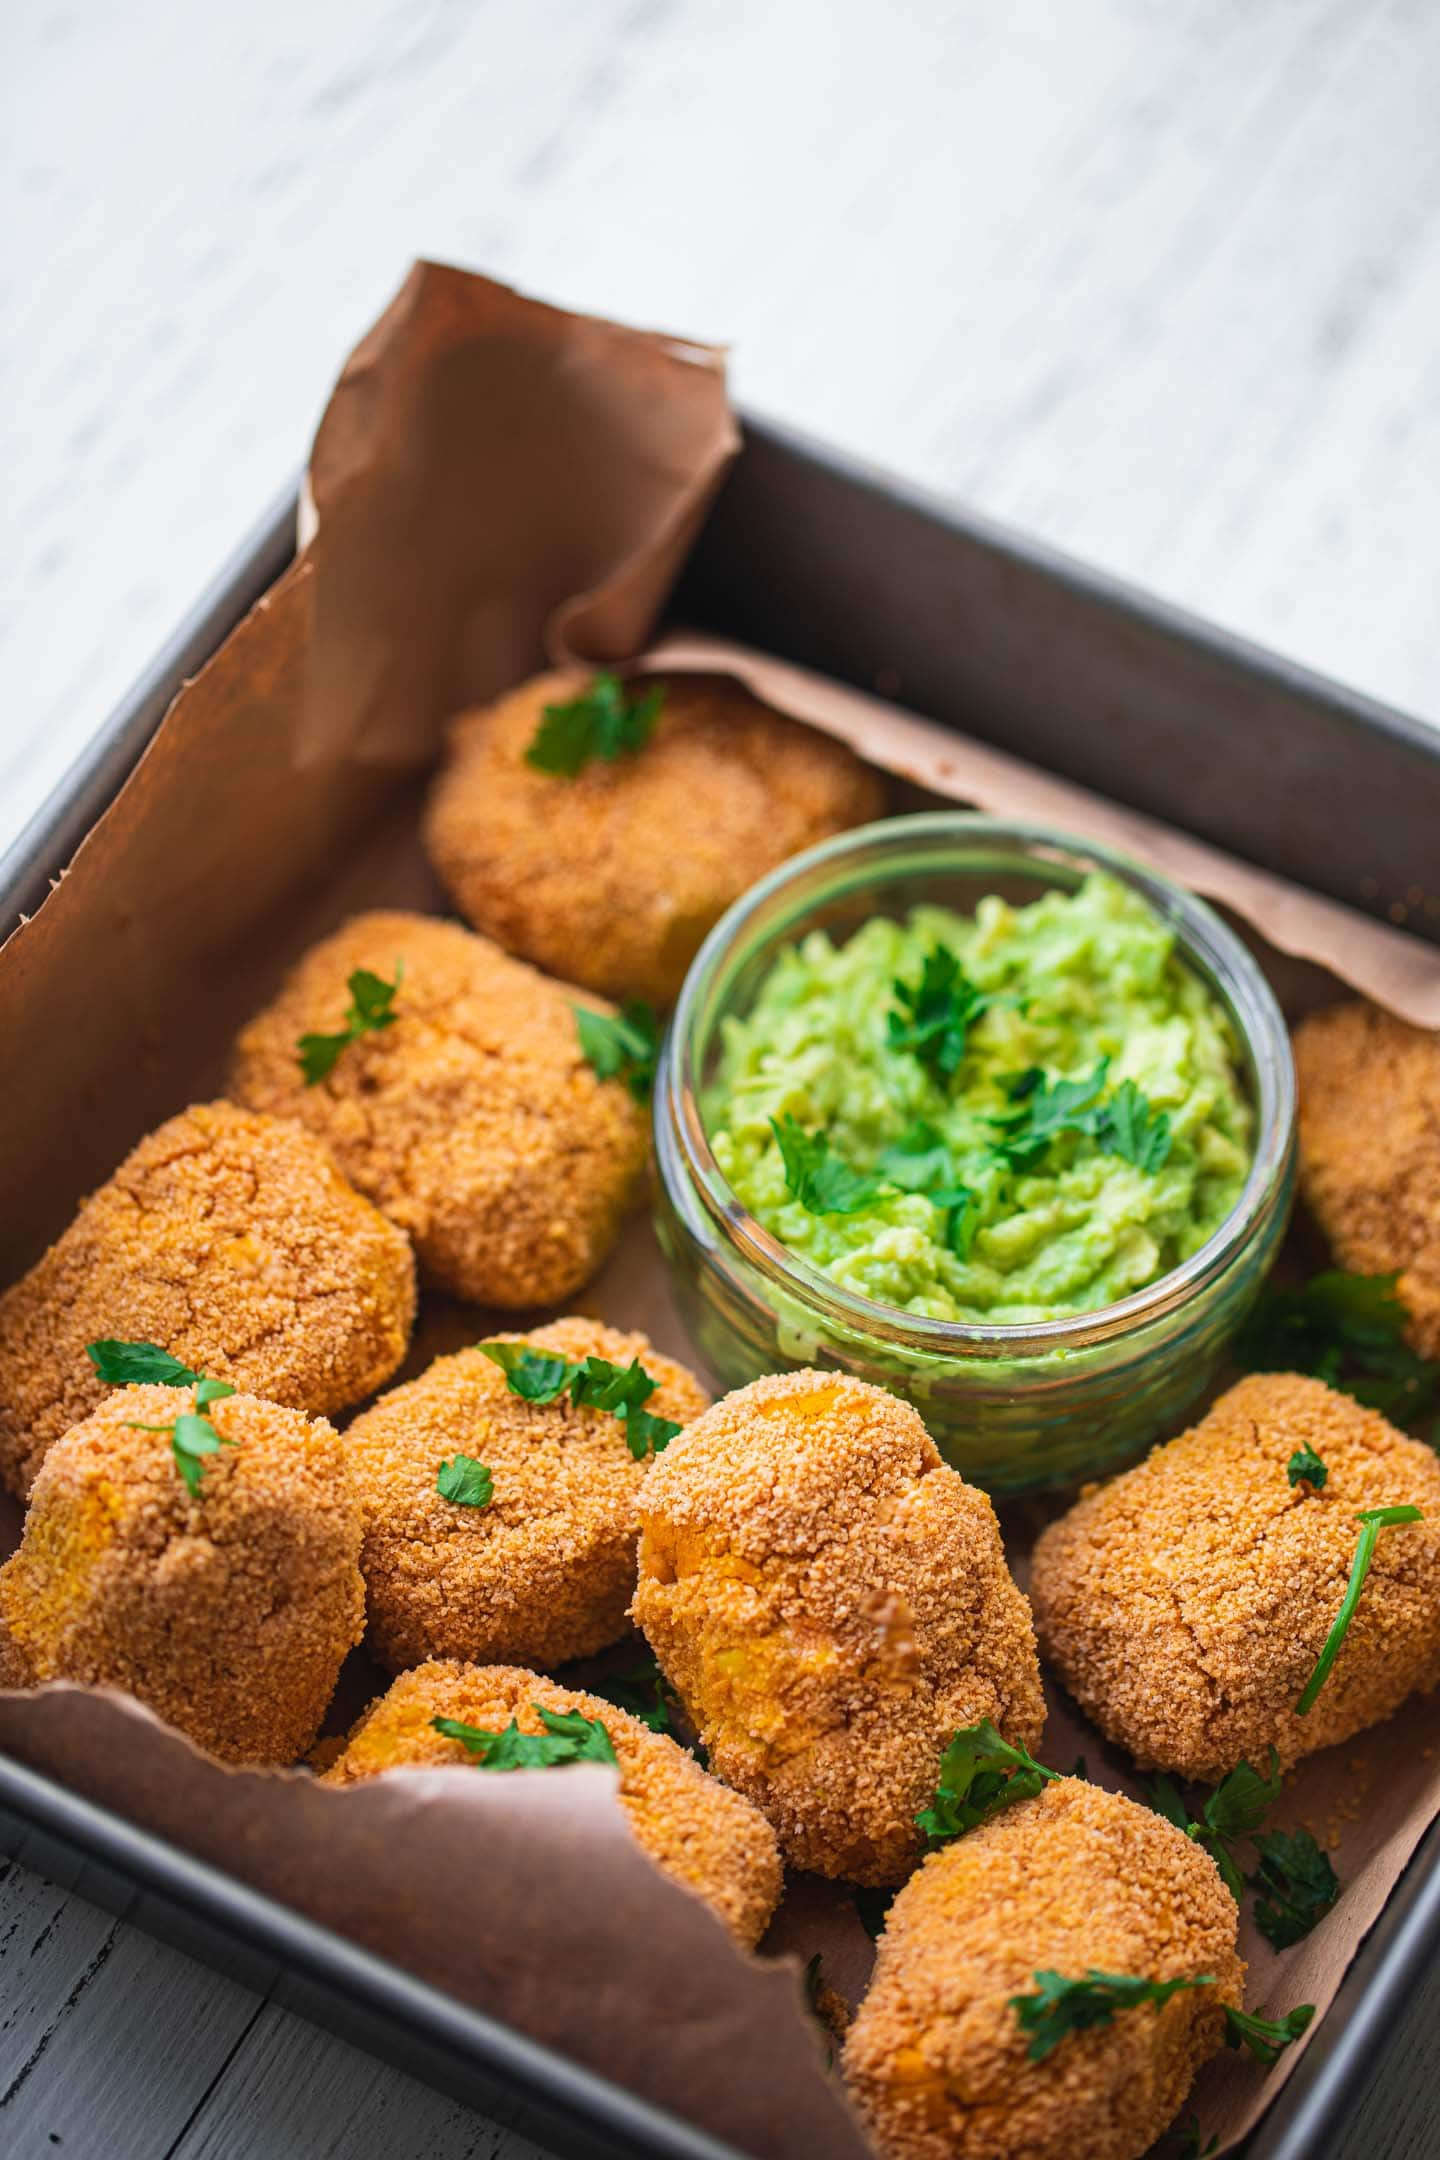 How to make vegan chicken nuggets